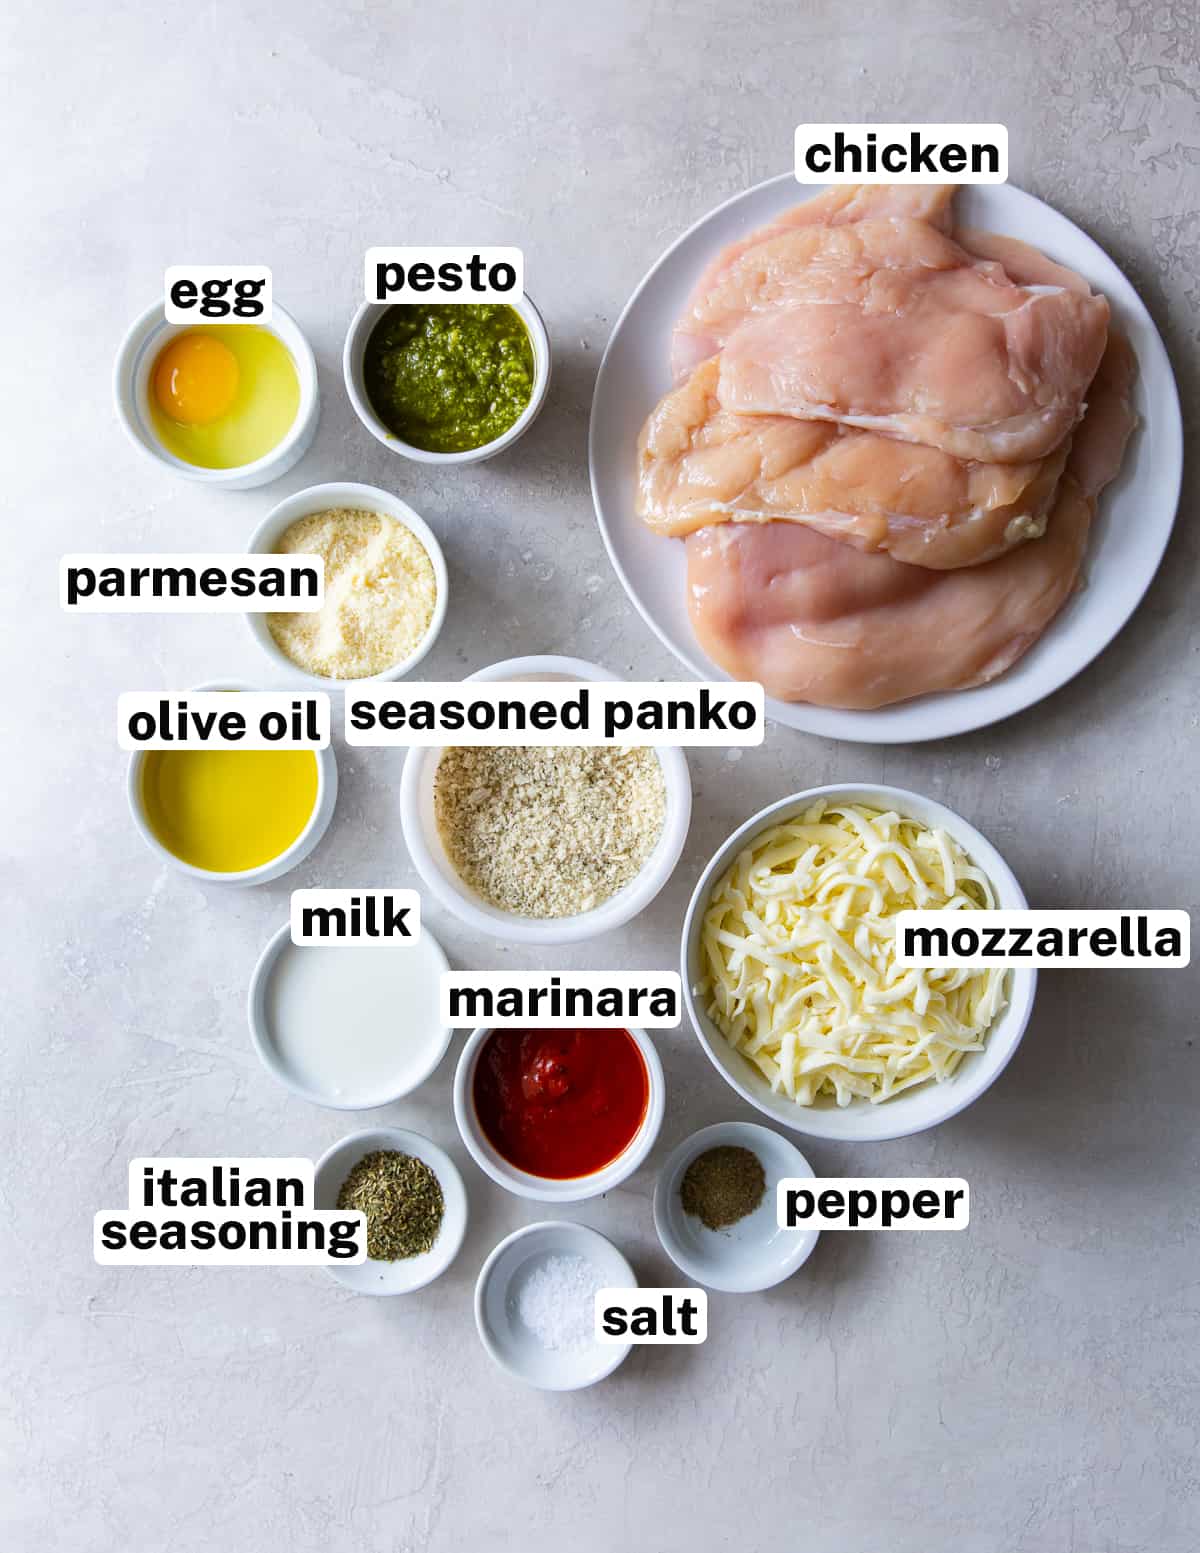 The ingredients for Chicken Pesto Parmesan with overlay text.